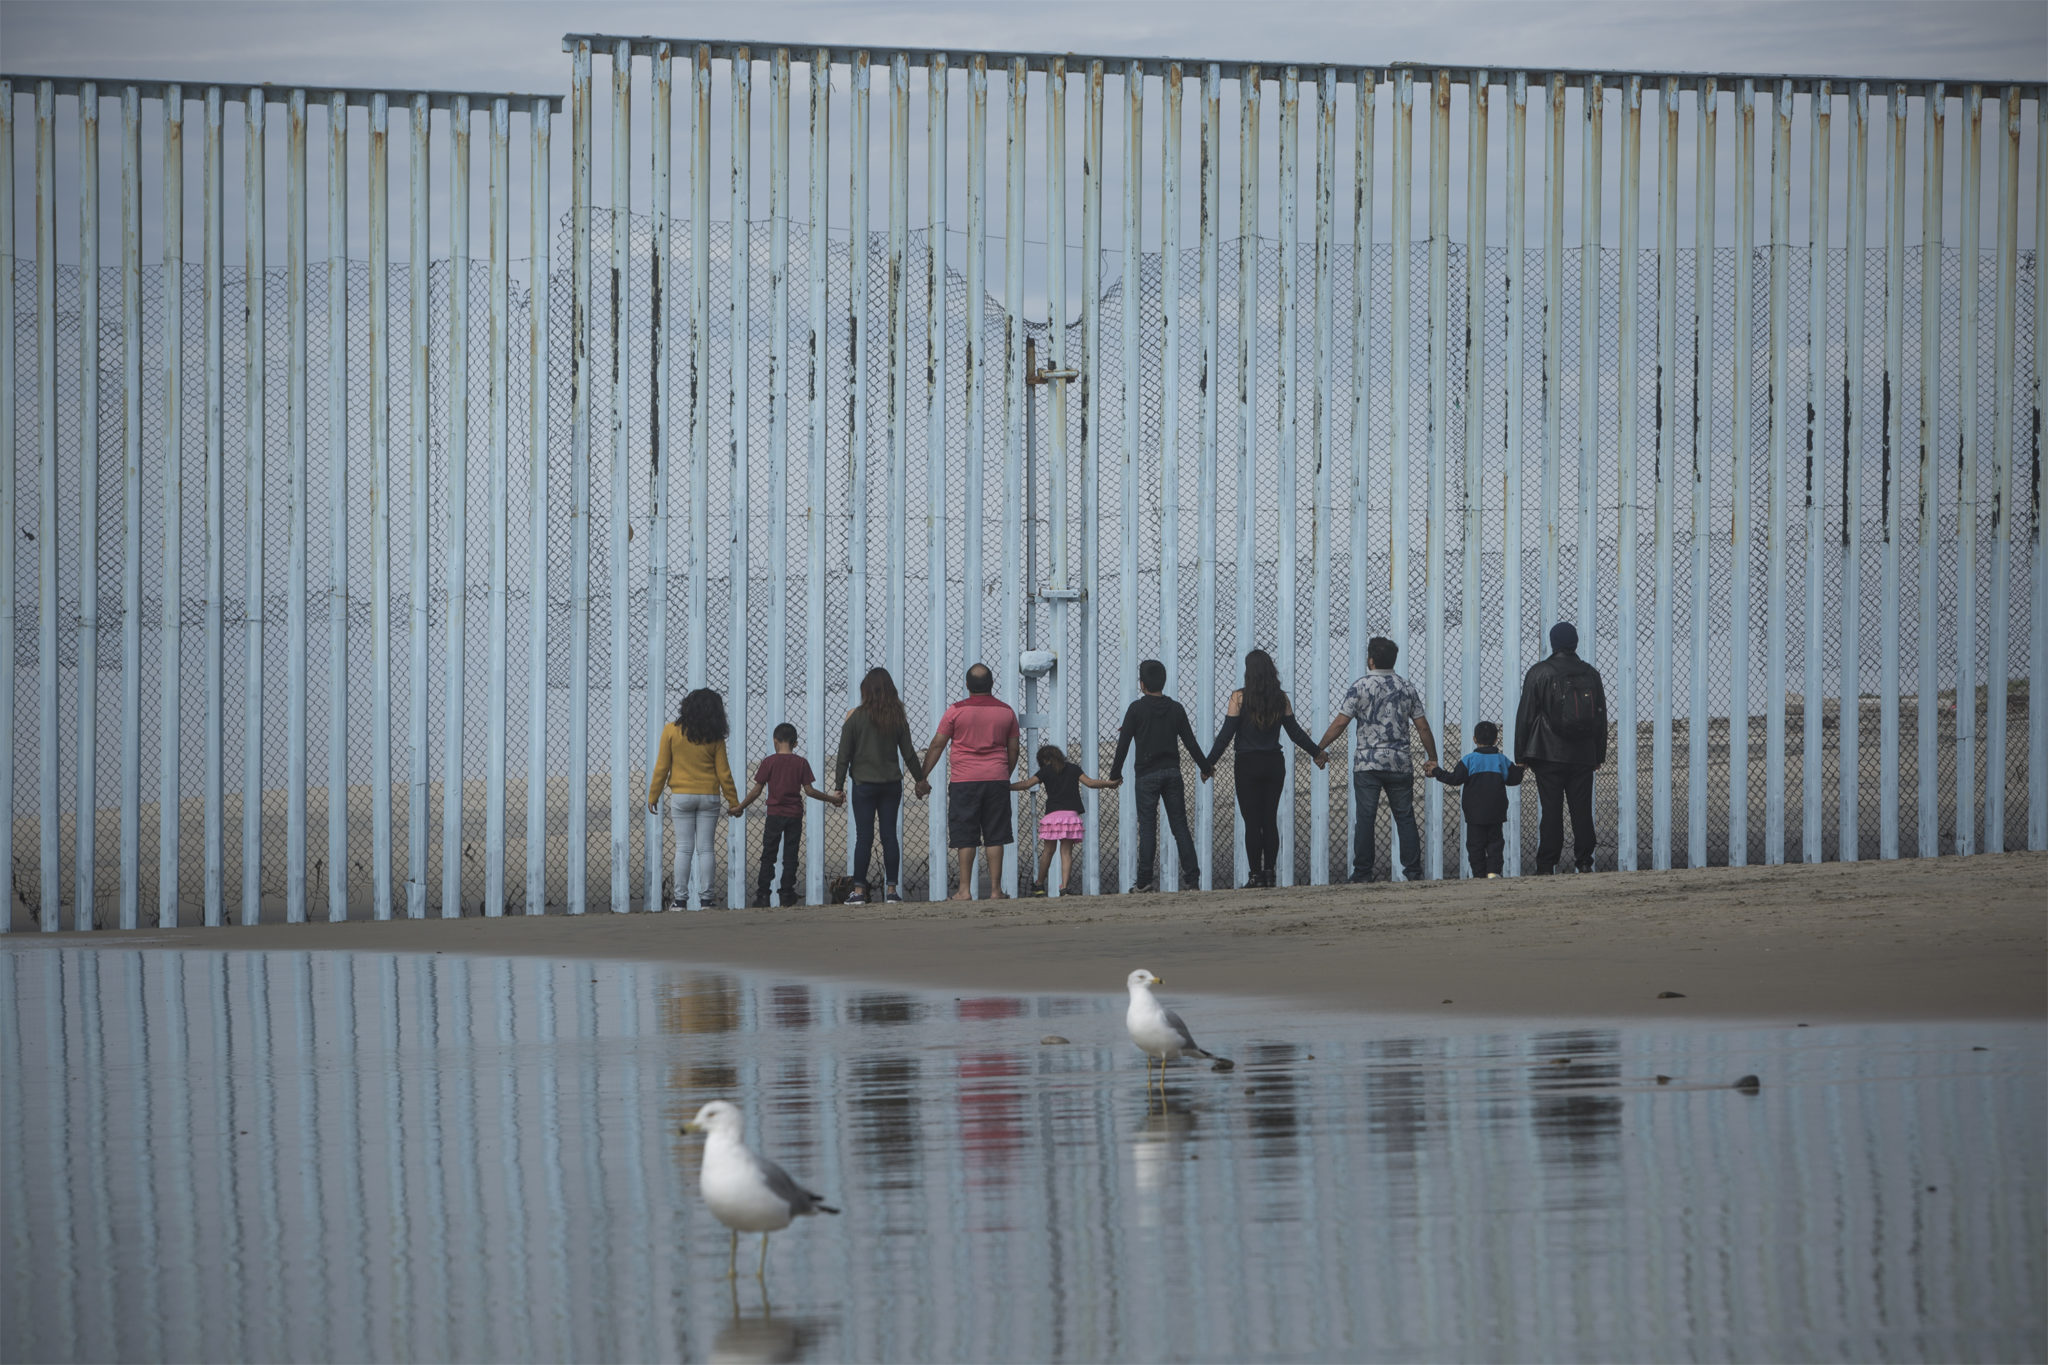 USA-Mexico: Trump’s border crackdown pushes refugees into dangerous limbo